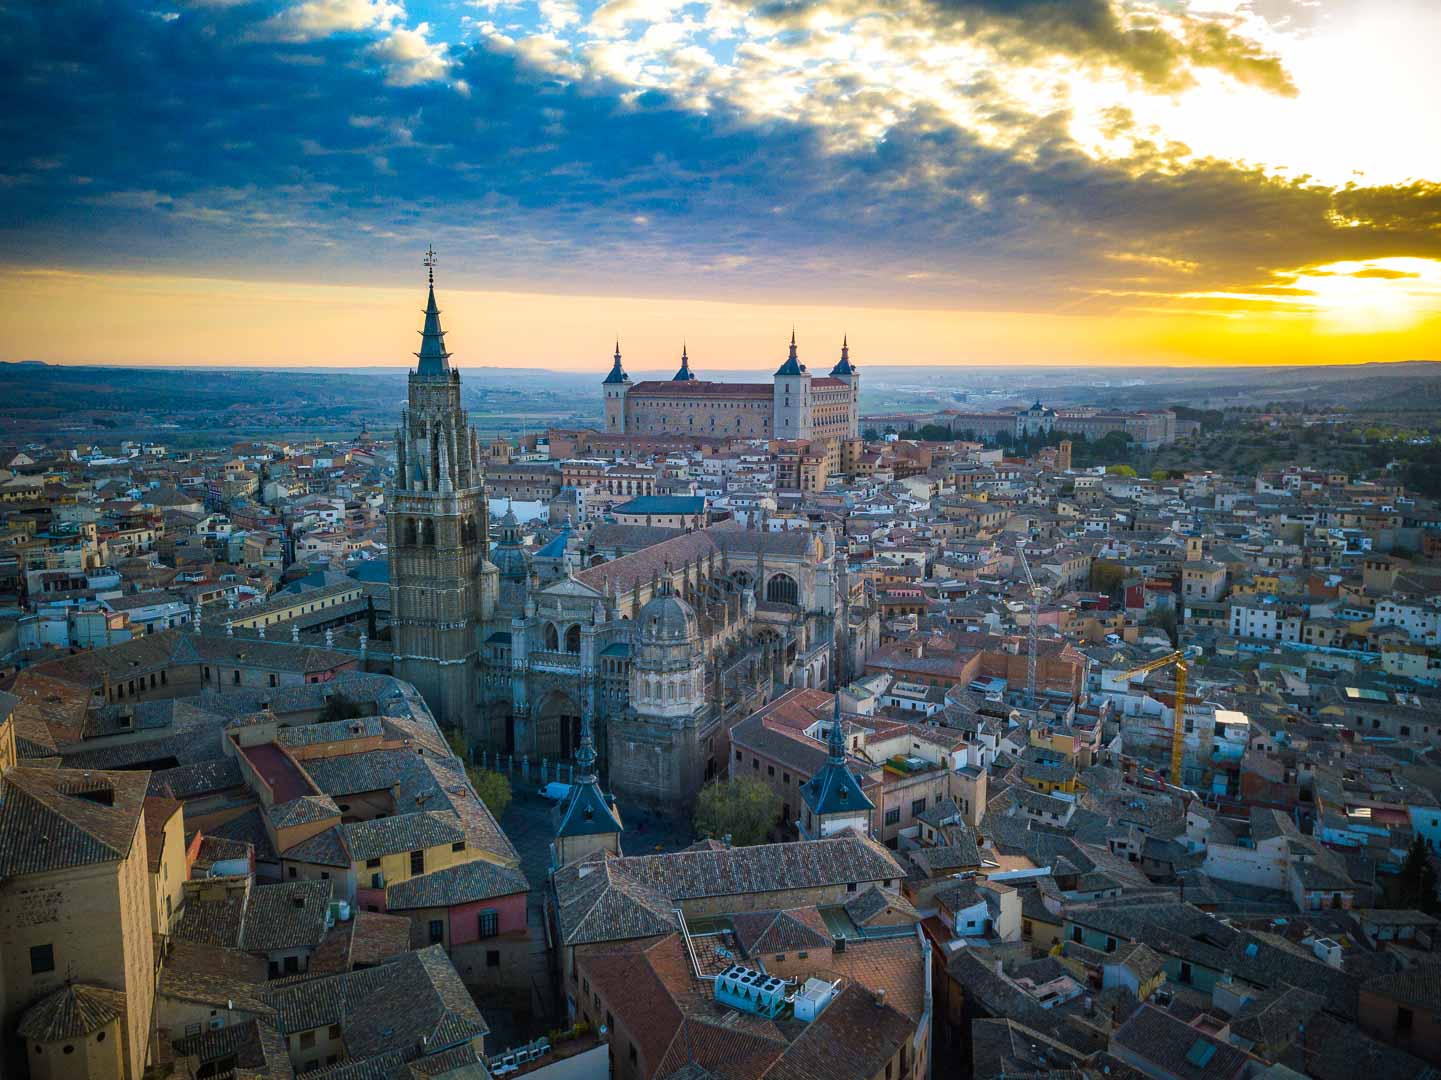 the sun rising over toledo and the toledo cathedral